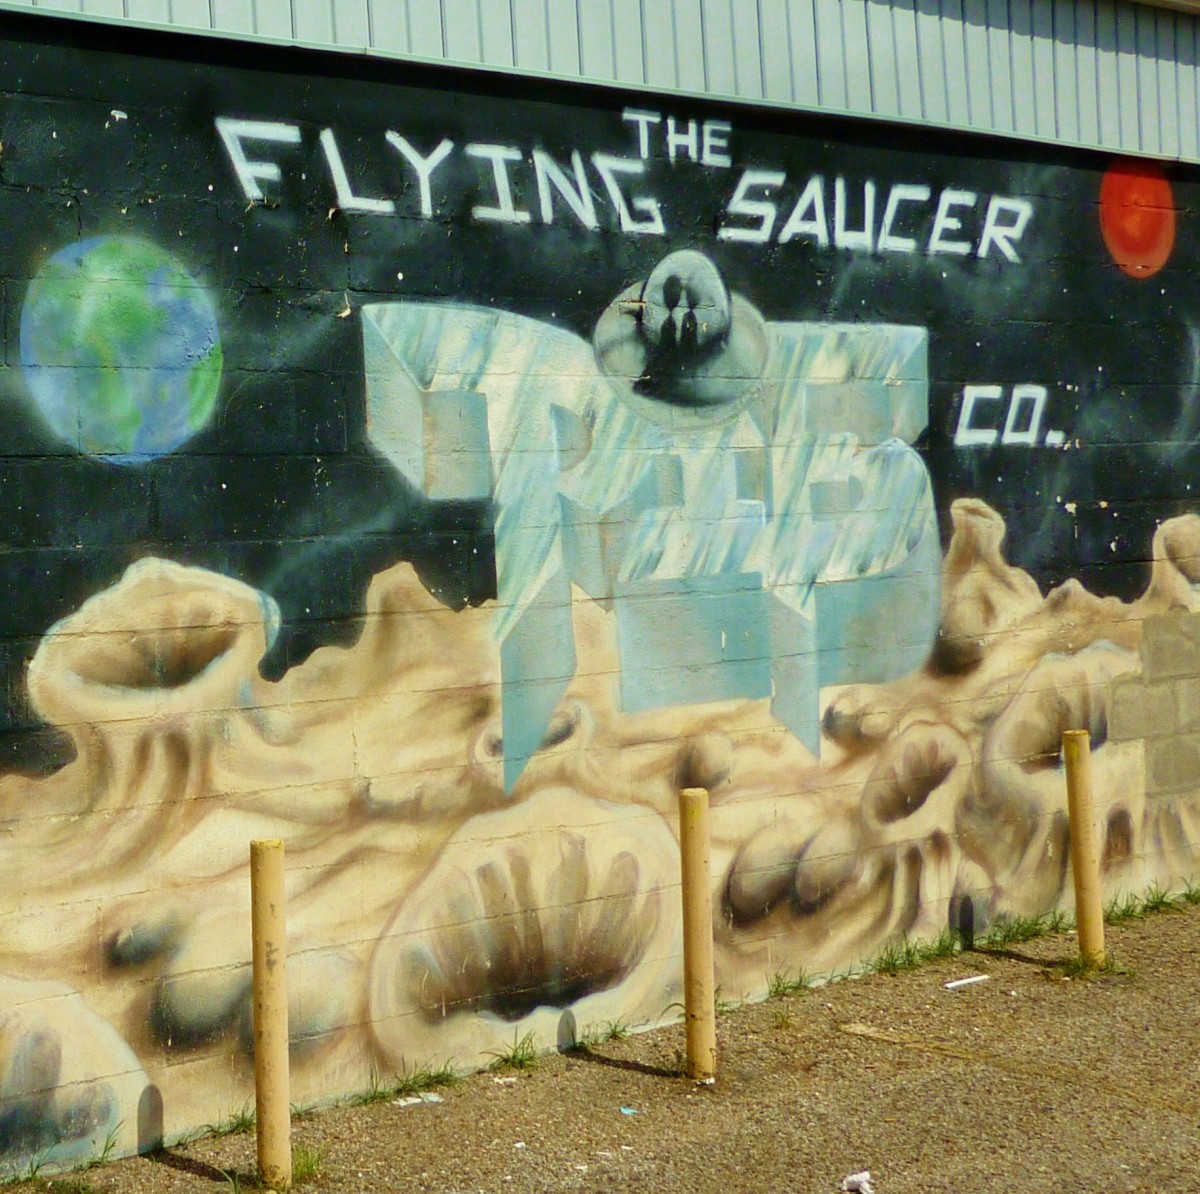 The pie portion of the mural 